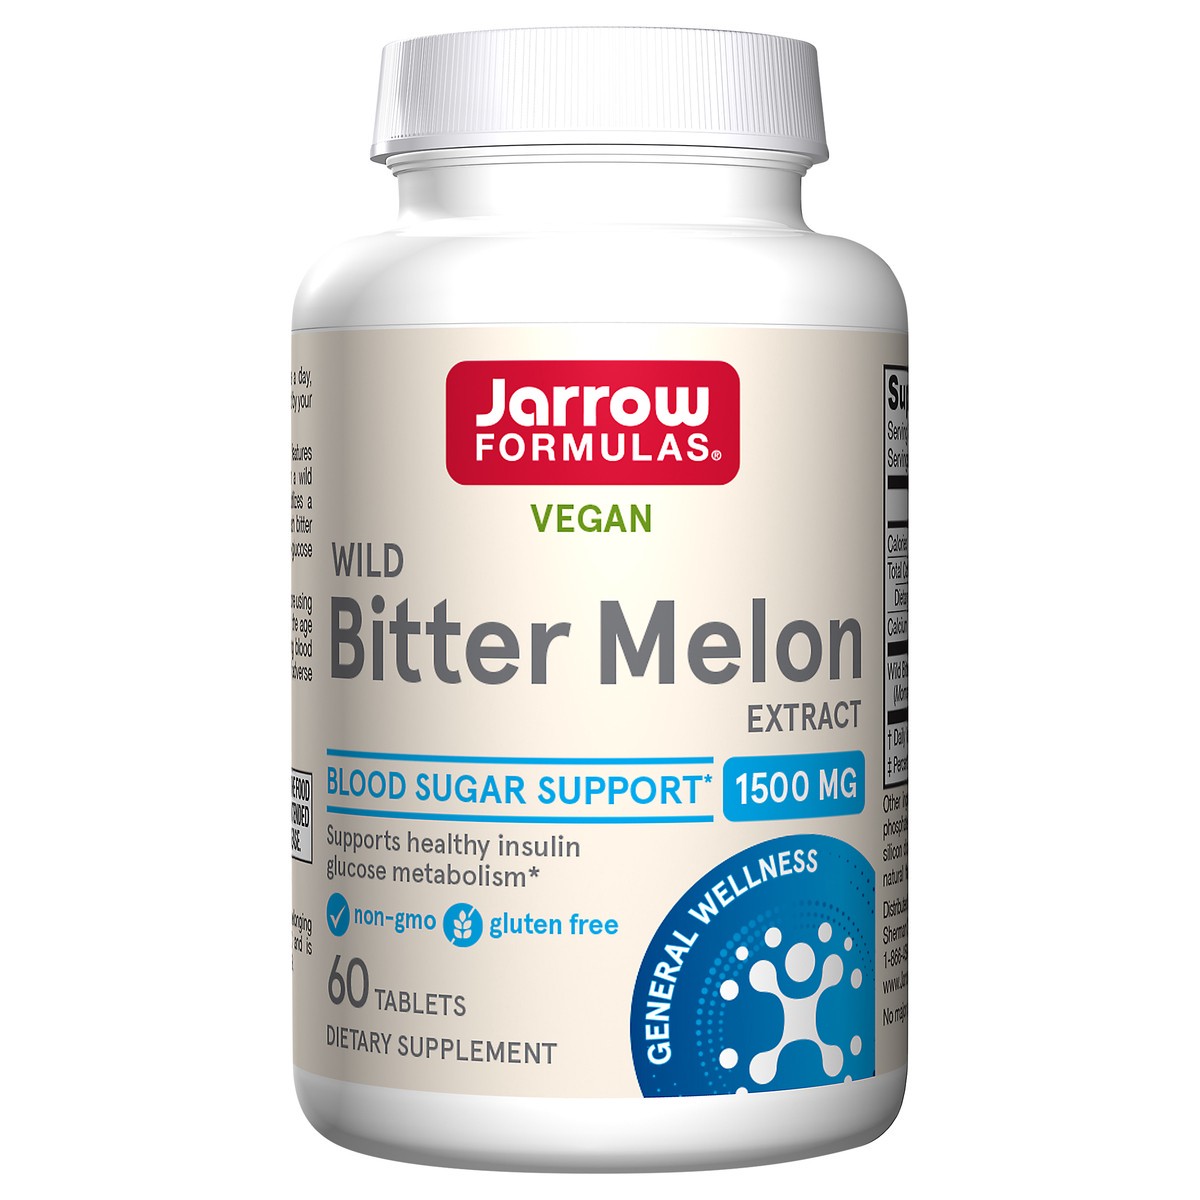 slide 1 of 4, Jarrow Formulas Wild Bitter Melon Extract 1500 mg - 60 Tablets - Patented & Clinically Tested - Dietary Supplement Supports Insulin-Glucose Metabolism - 30 Servings (PACKAGING MAY VARY), 1 ct